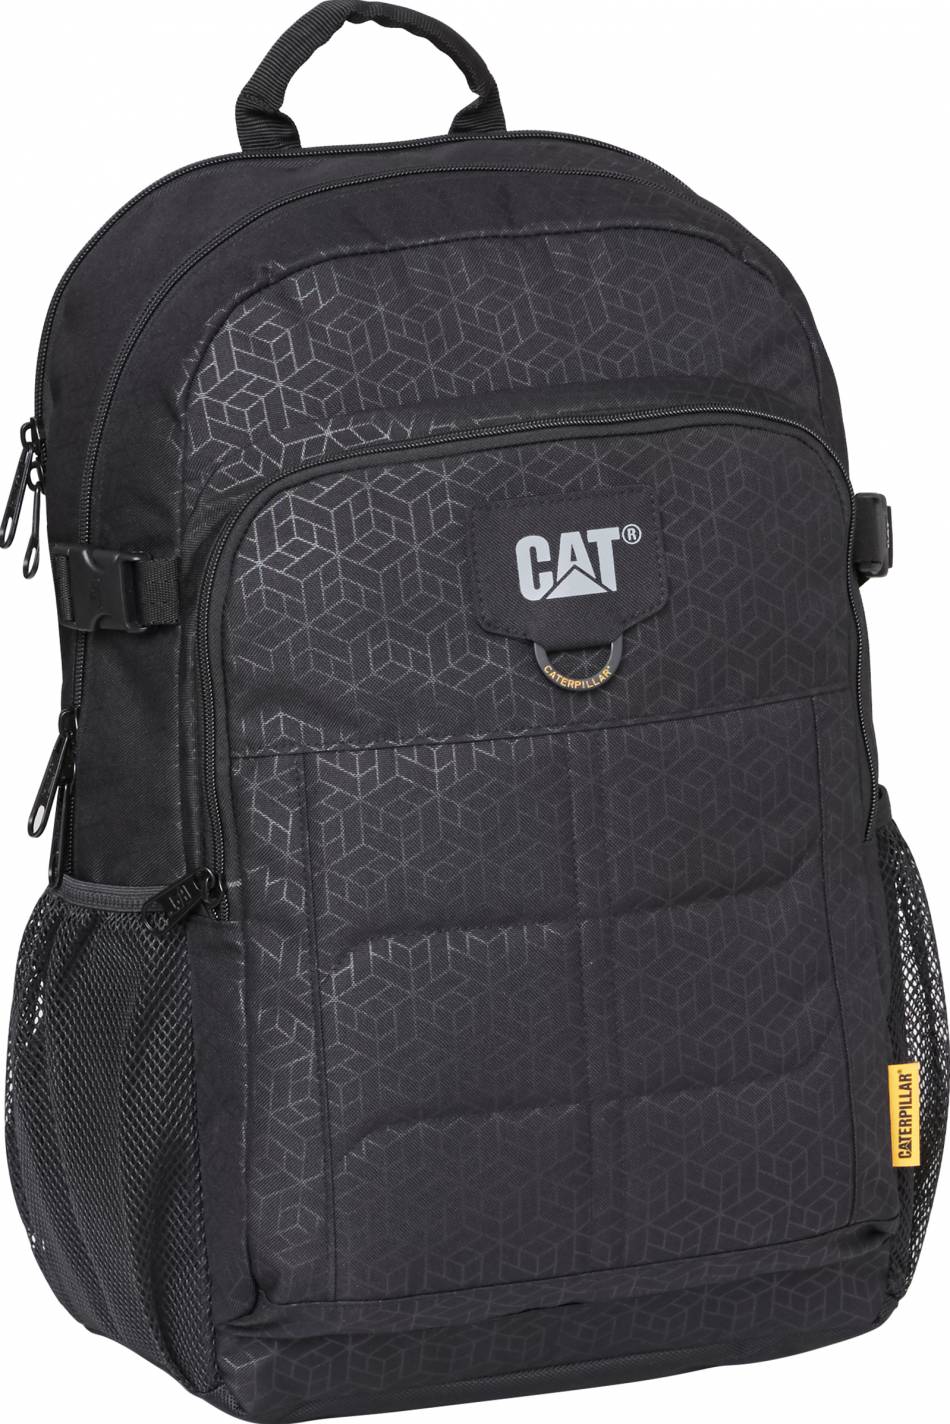 Mittens stream Credentials Cat® Bags - Barry Backpack - Backpack